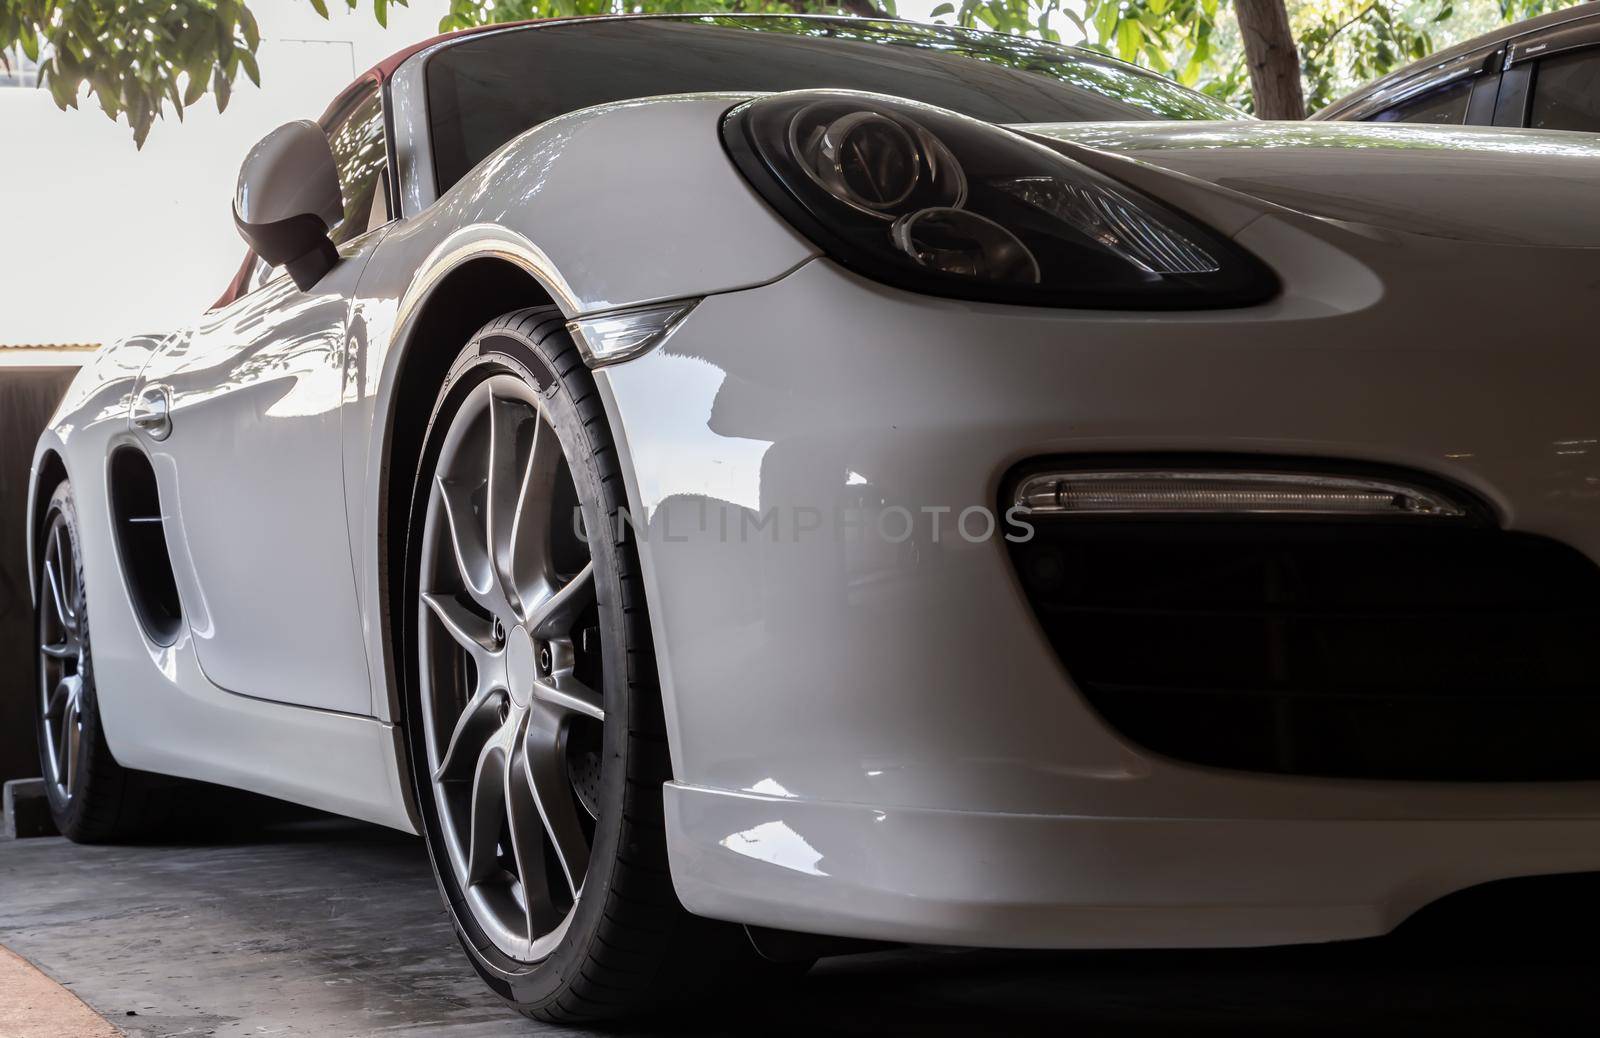 Close-up of Car Headlights and Car Wheel of White Sports Car parked in the parking lot.  by tosirikul